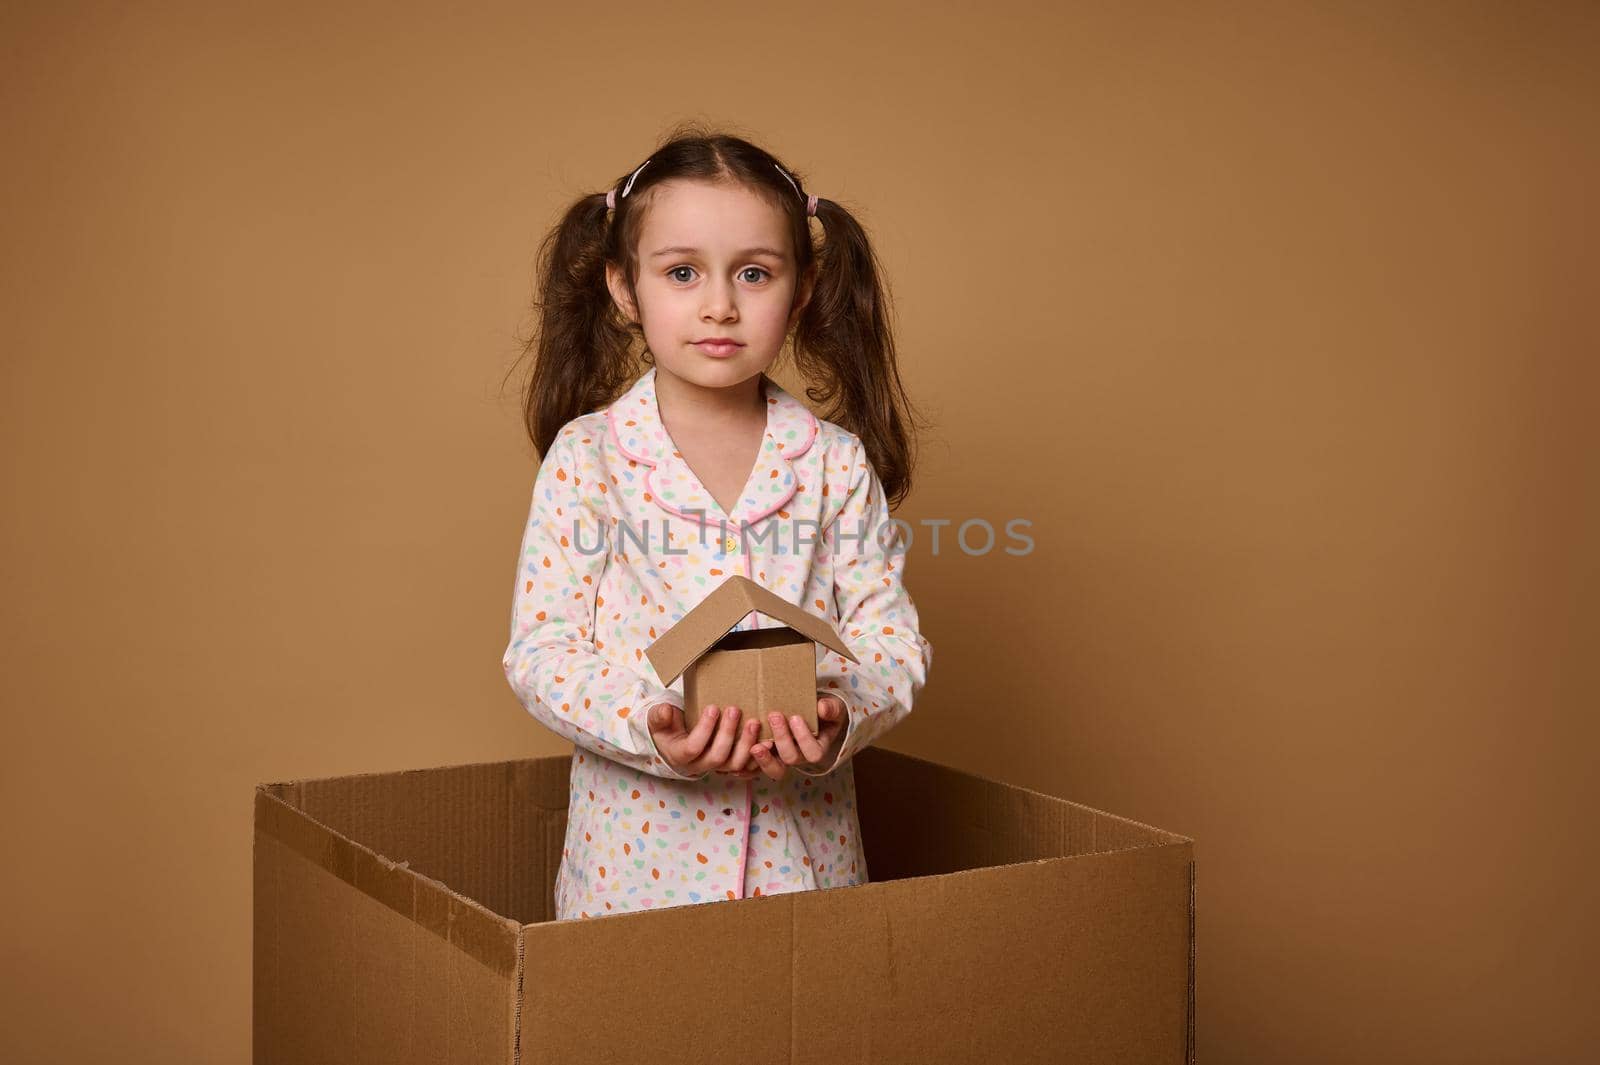 Little European girl, adorable kid in pajamas holds a craft cardboard house model being inside a box, against beige background with copy space for ads. The concept of investment, housing by artgf